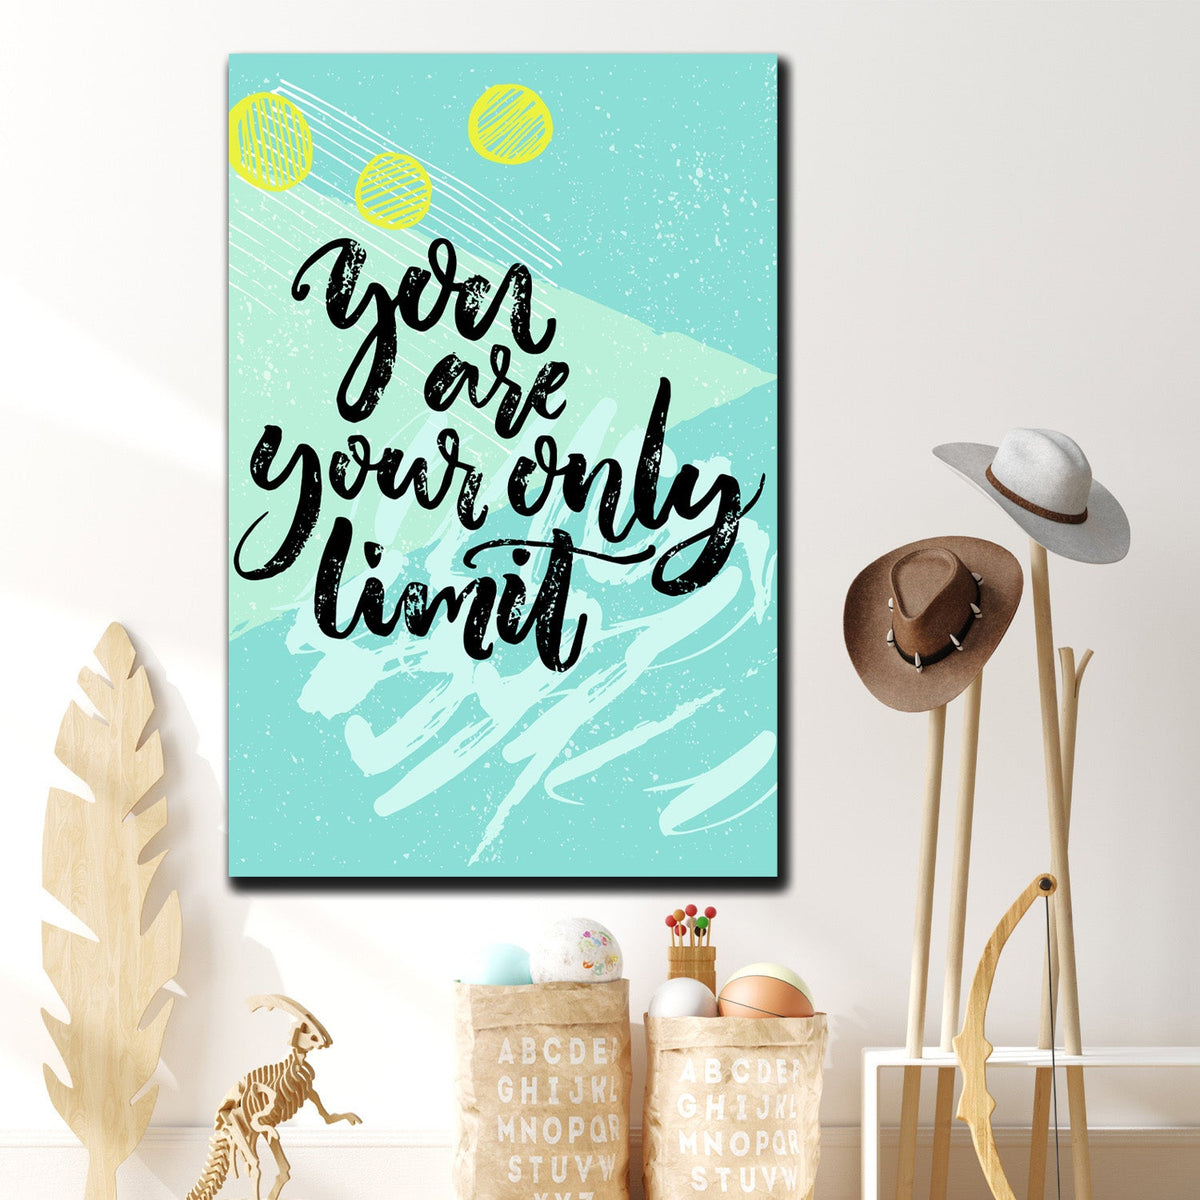 https://cdn.shopify.com/s/files/1/0387/9986/8044/products/YouareYourOnlyLimitCanvasArtprintStretched-4.jpg